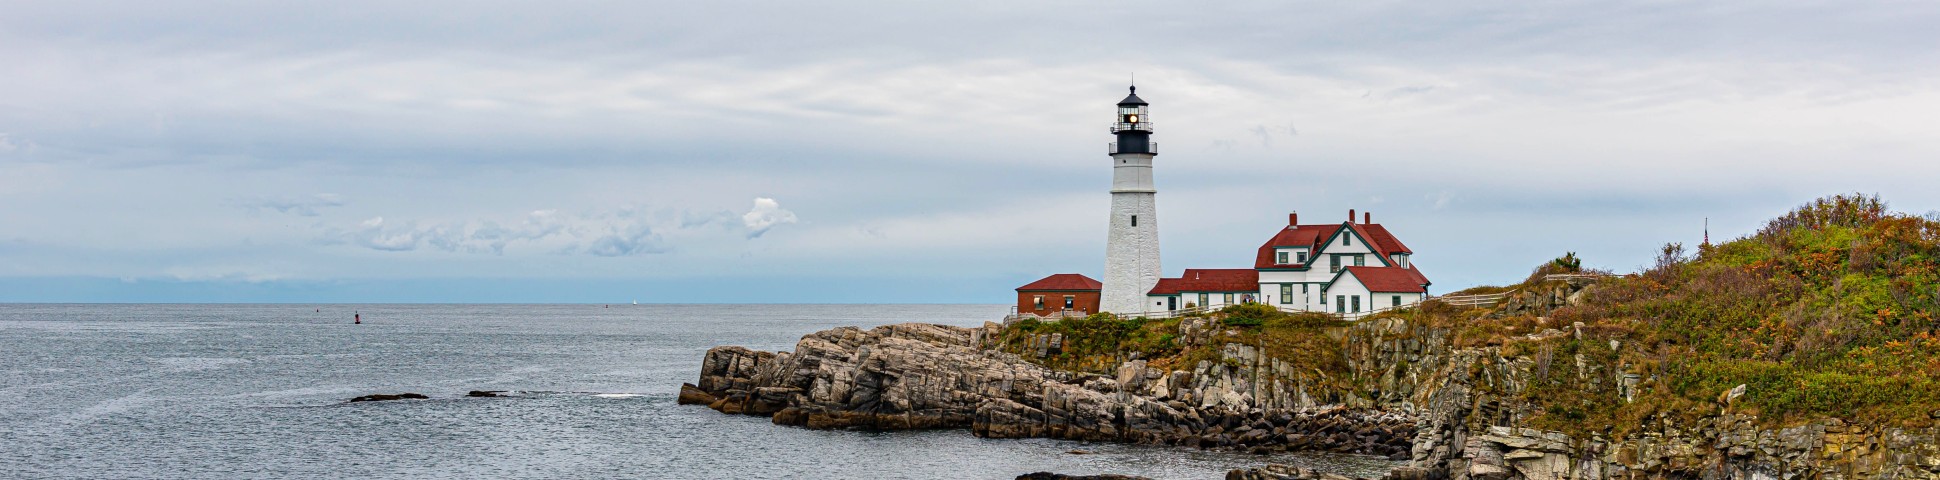 Lighthouse in Maine (USA)